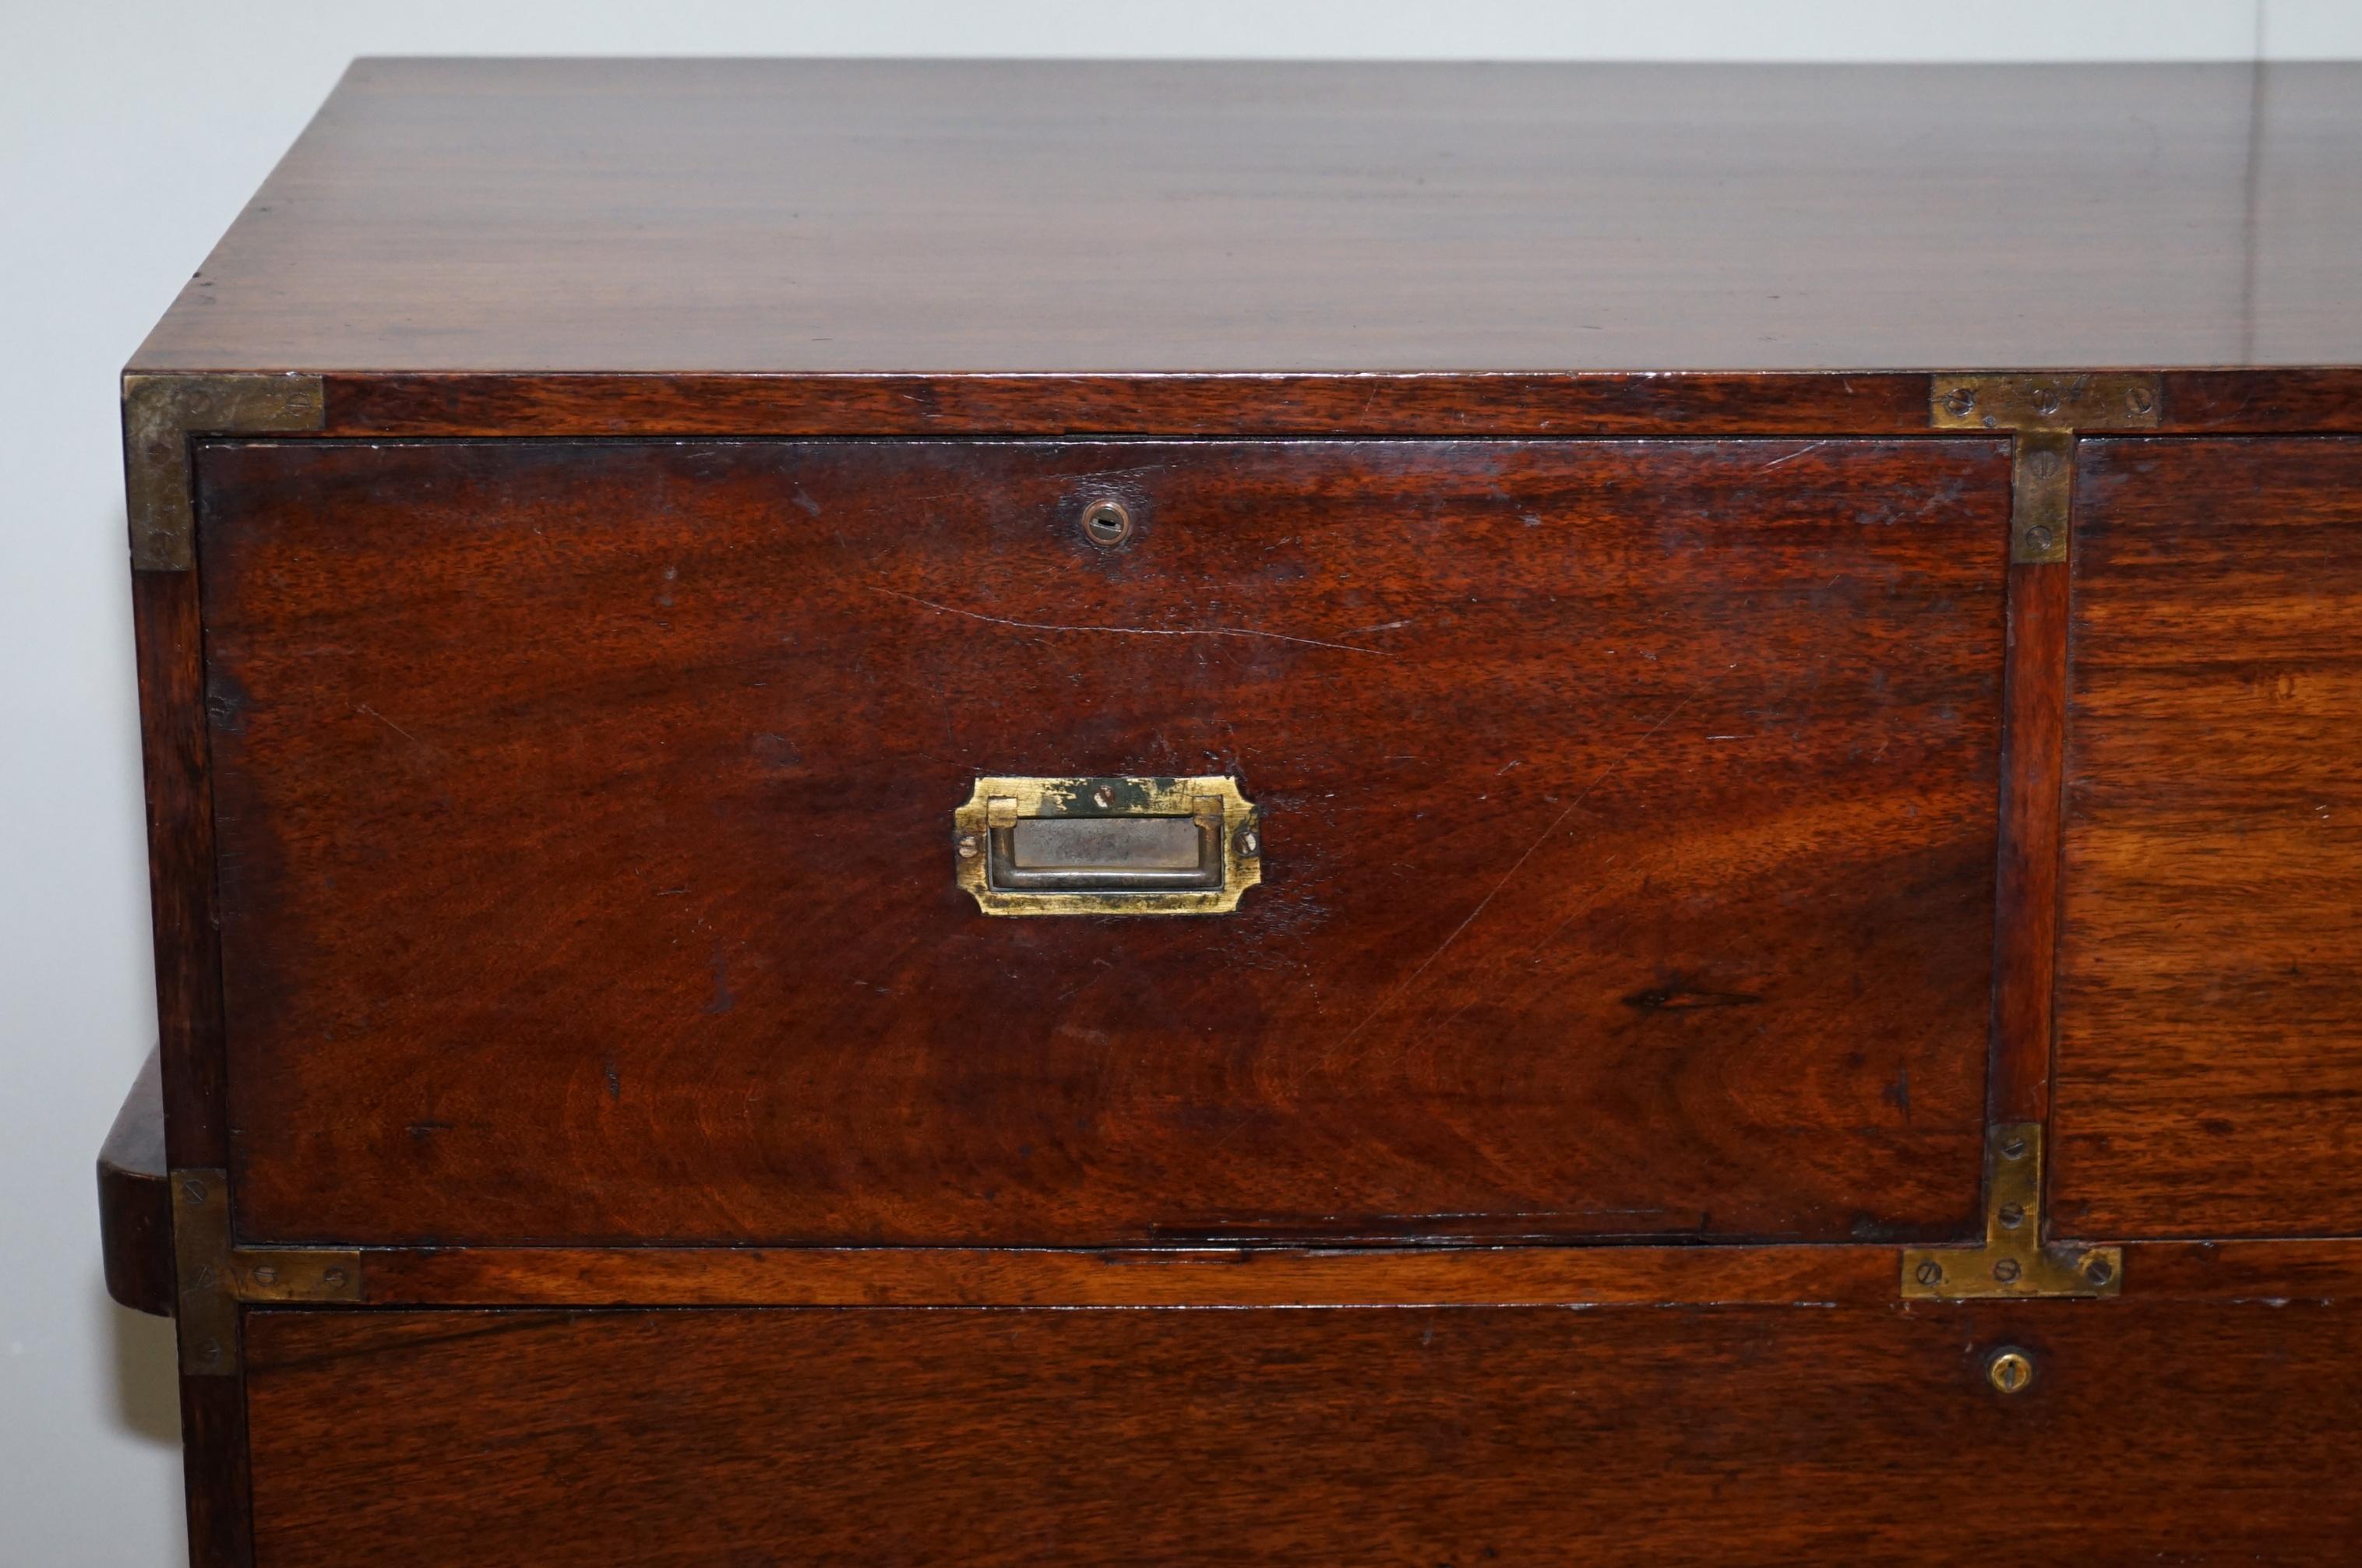 High Victorian Restored 1876 Stamped Camphor Wood Military Campaign Chest of Drawers with Desk